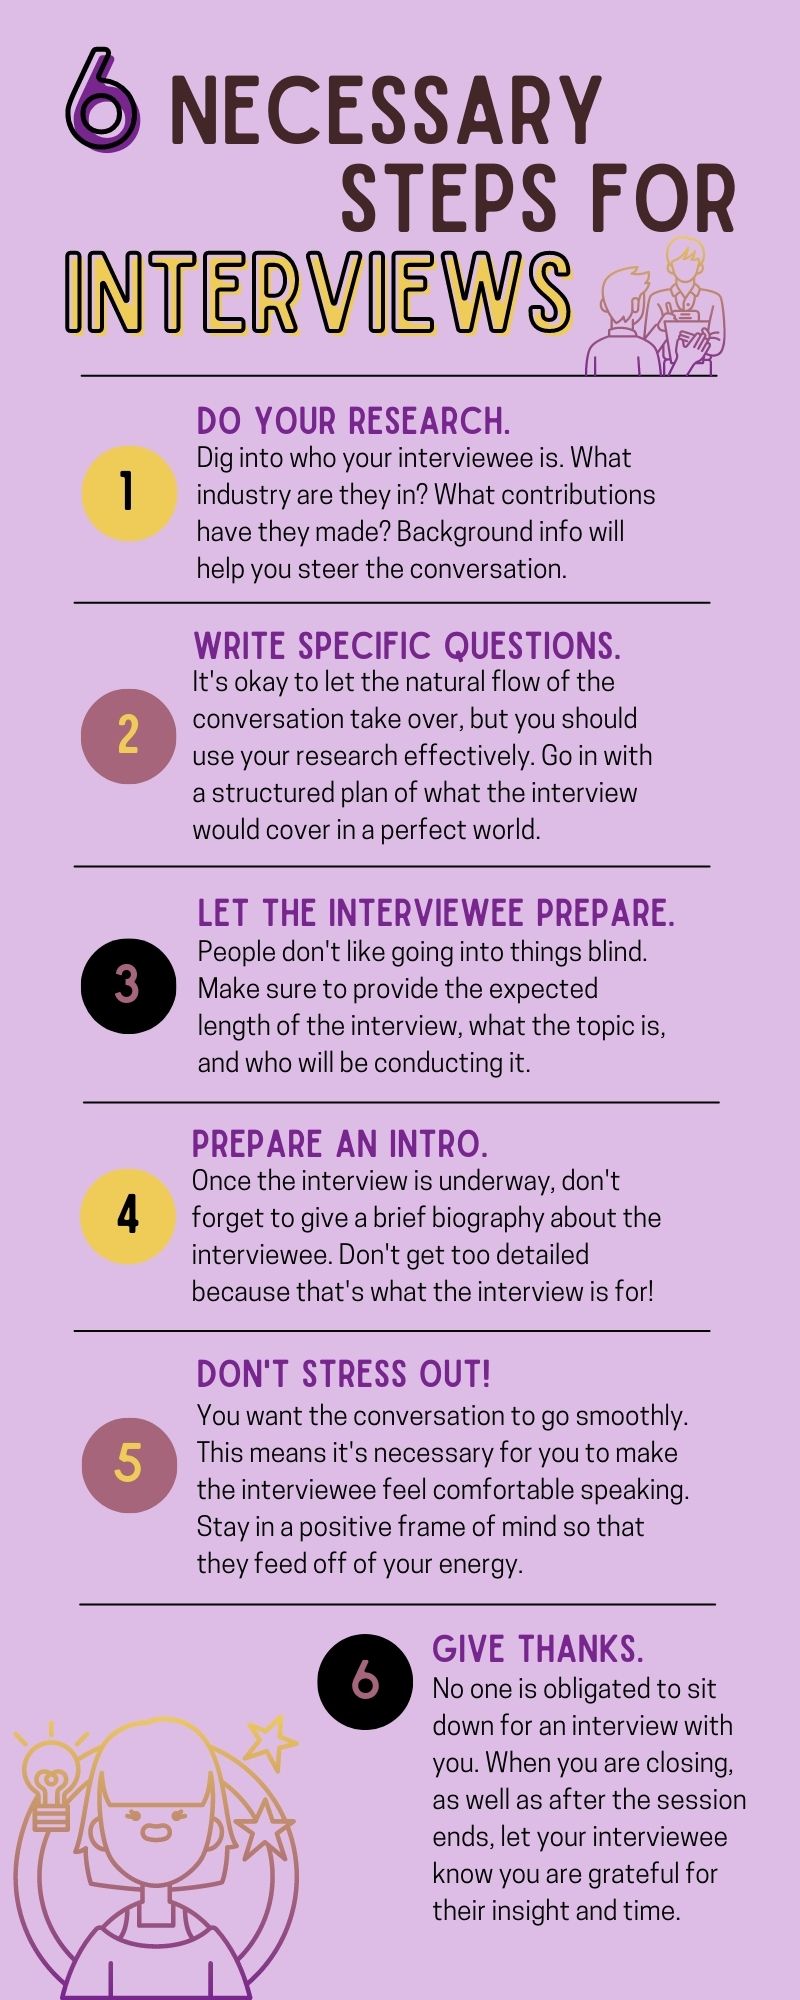 6 Necessary Steps for Interviews